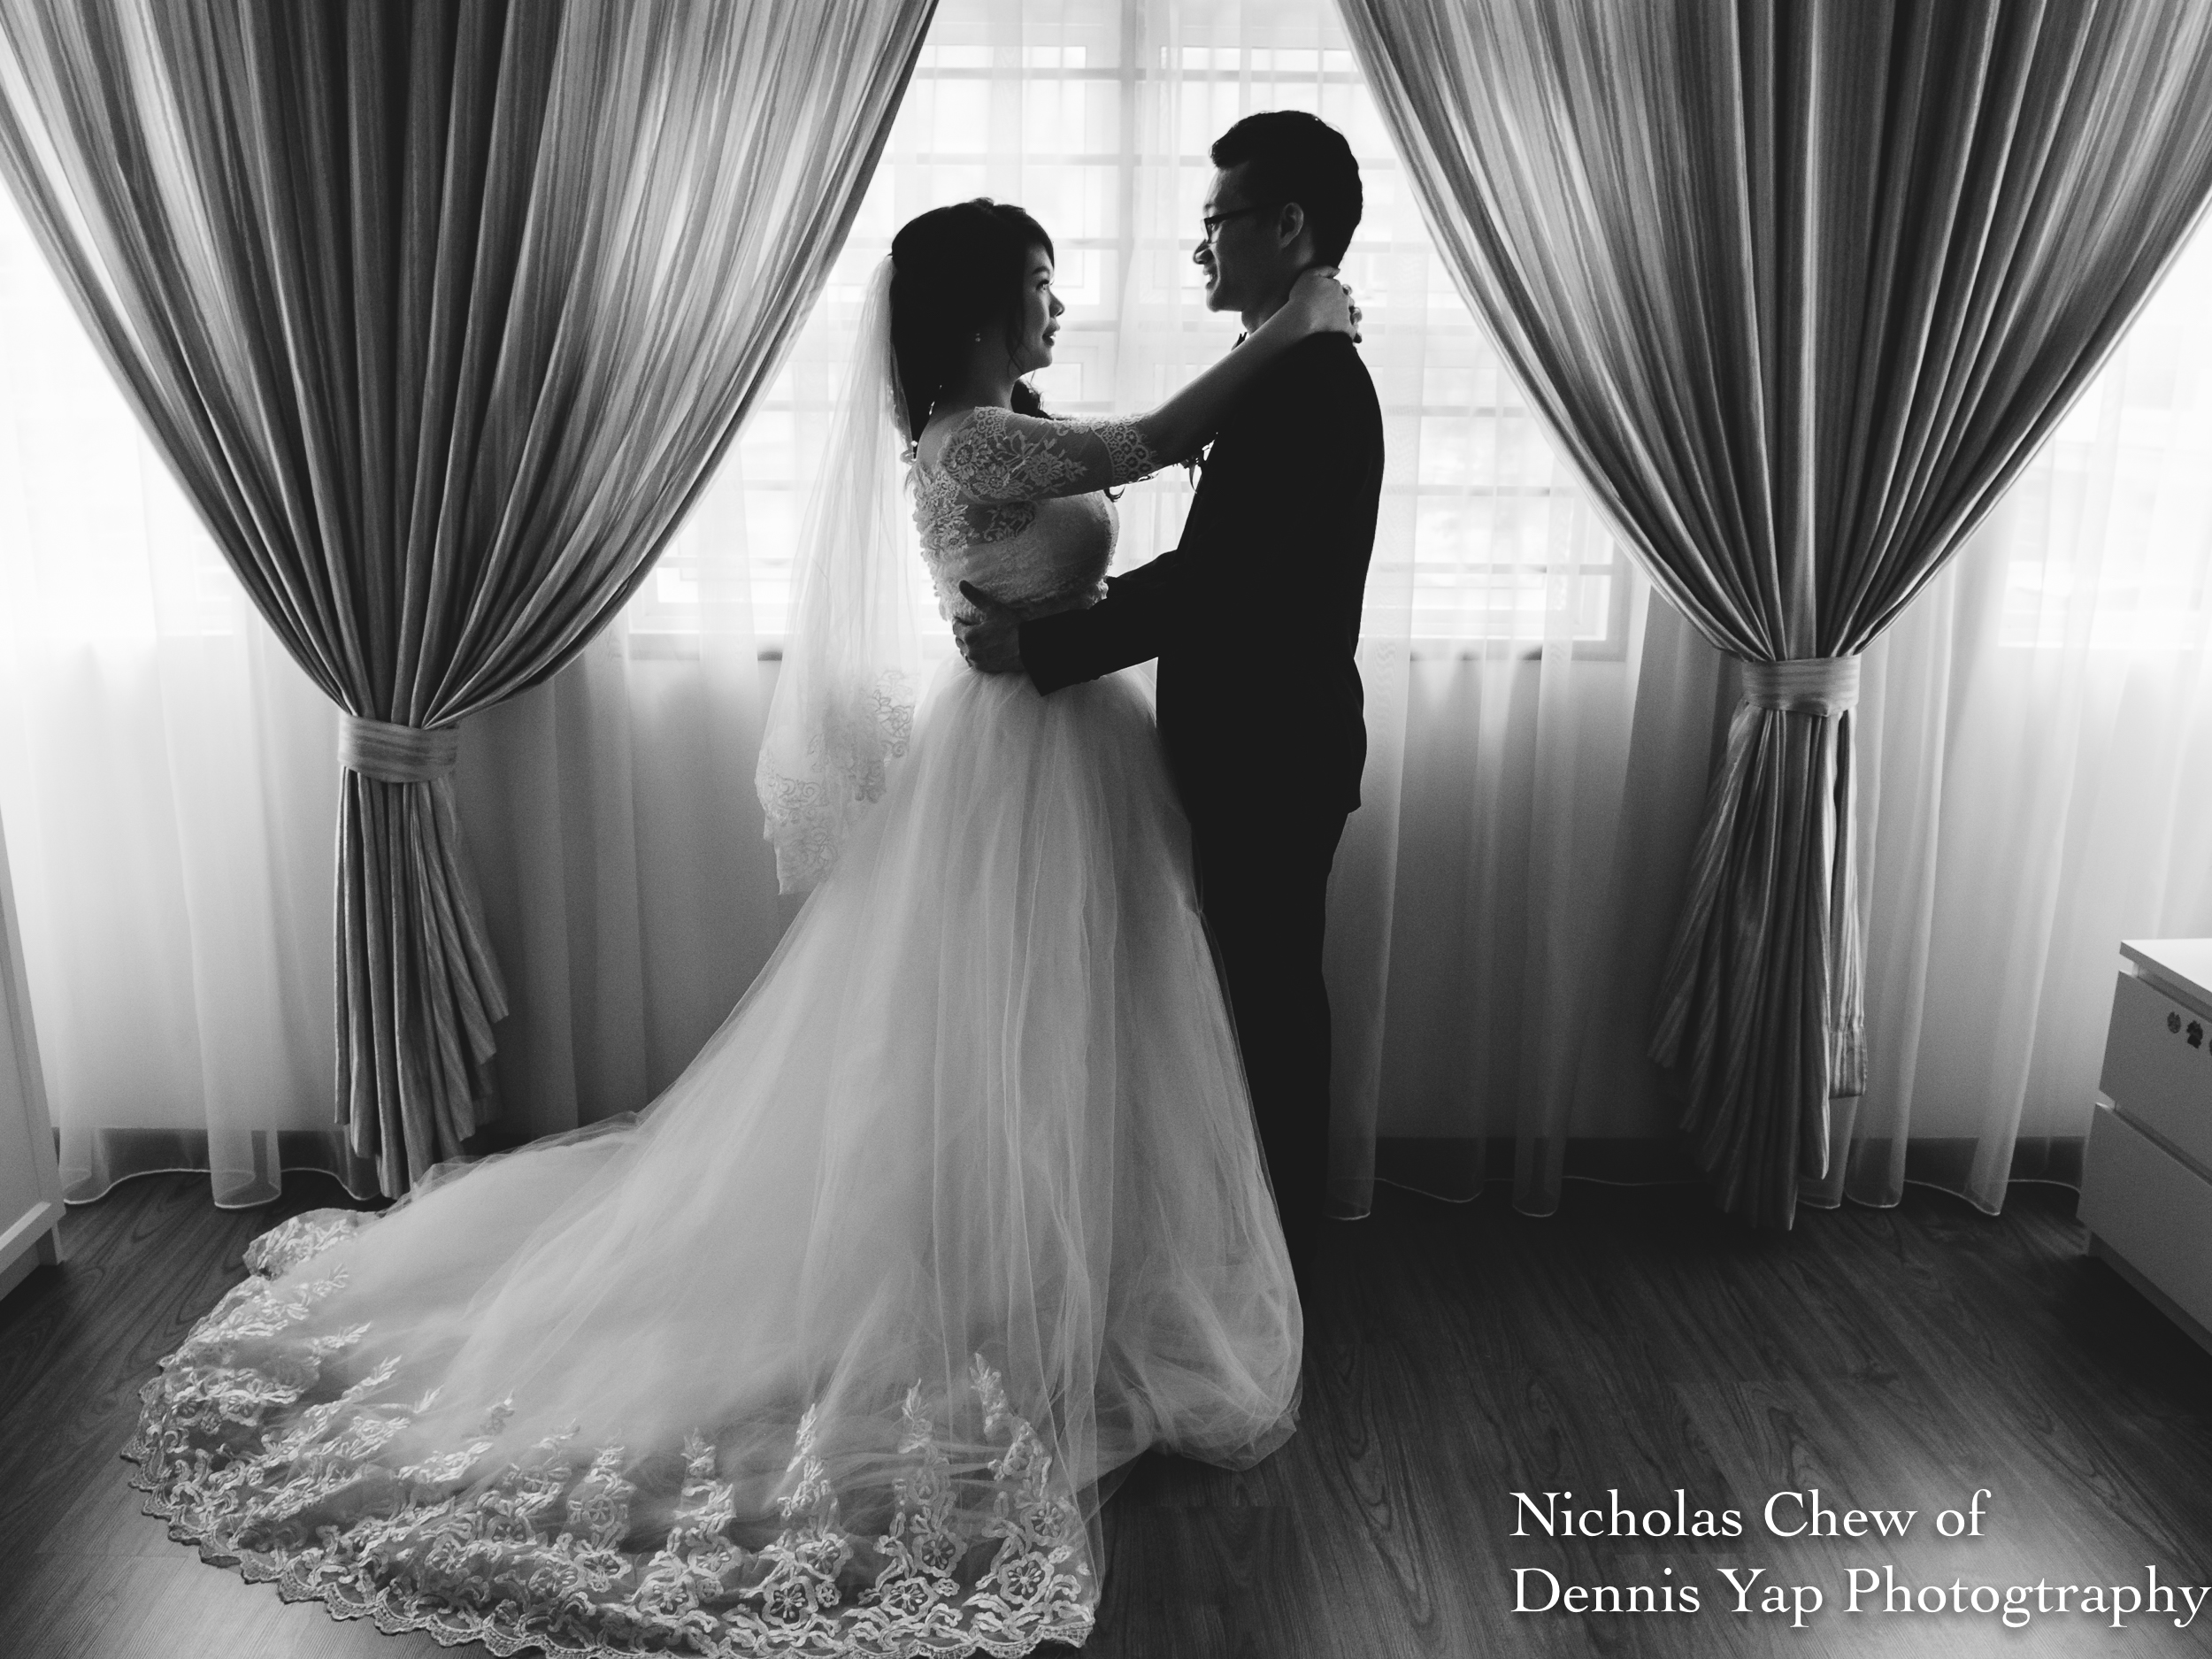 Nicholas Chew profile wedding natural candid moments chinese traditional church garden of dennis yap photography001Nicholas Profile-3.jpg